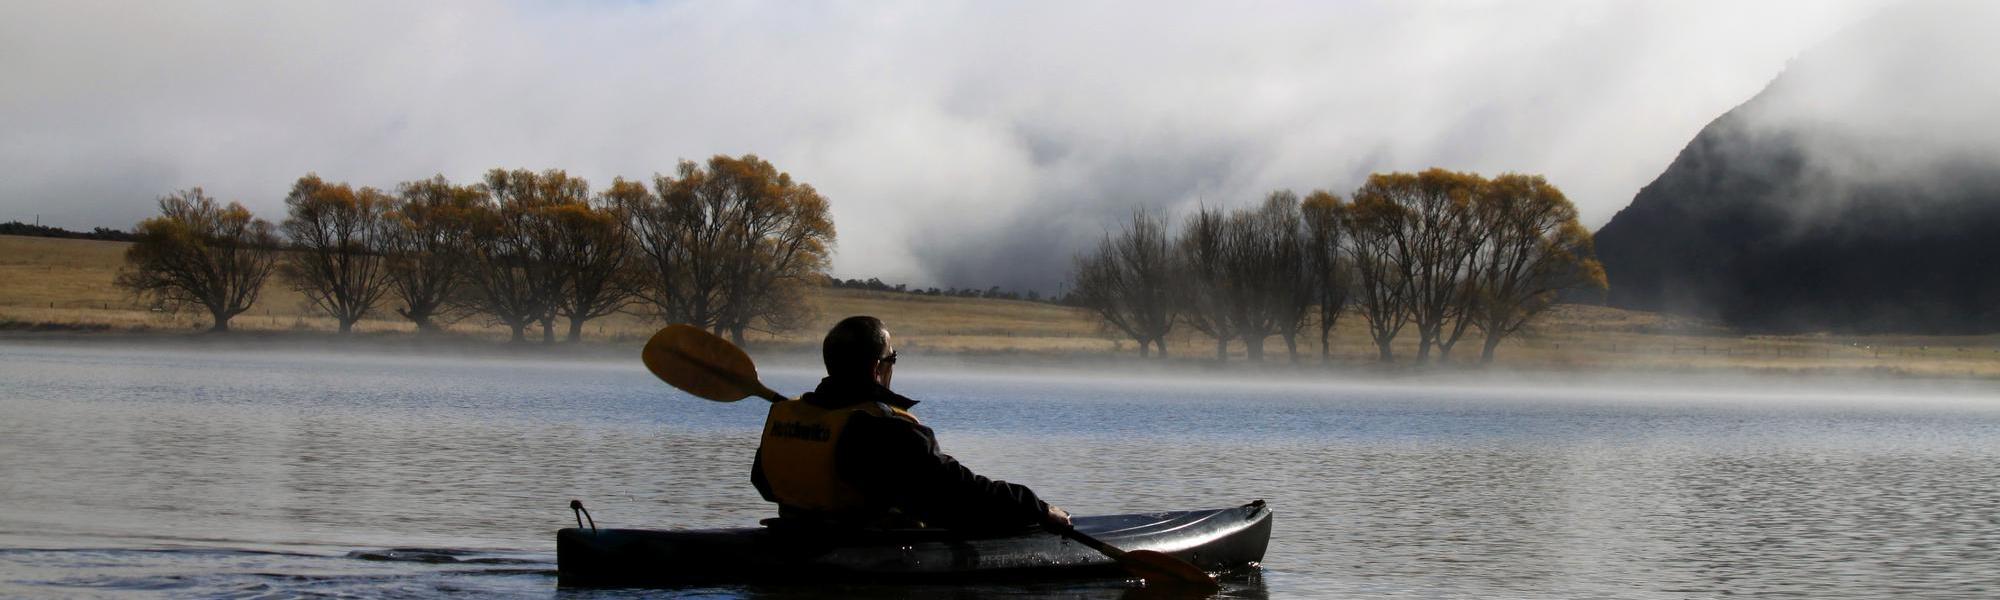 Try your hand at kayaking during your holiday stay at Wilderness Lodge, NZ.